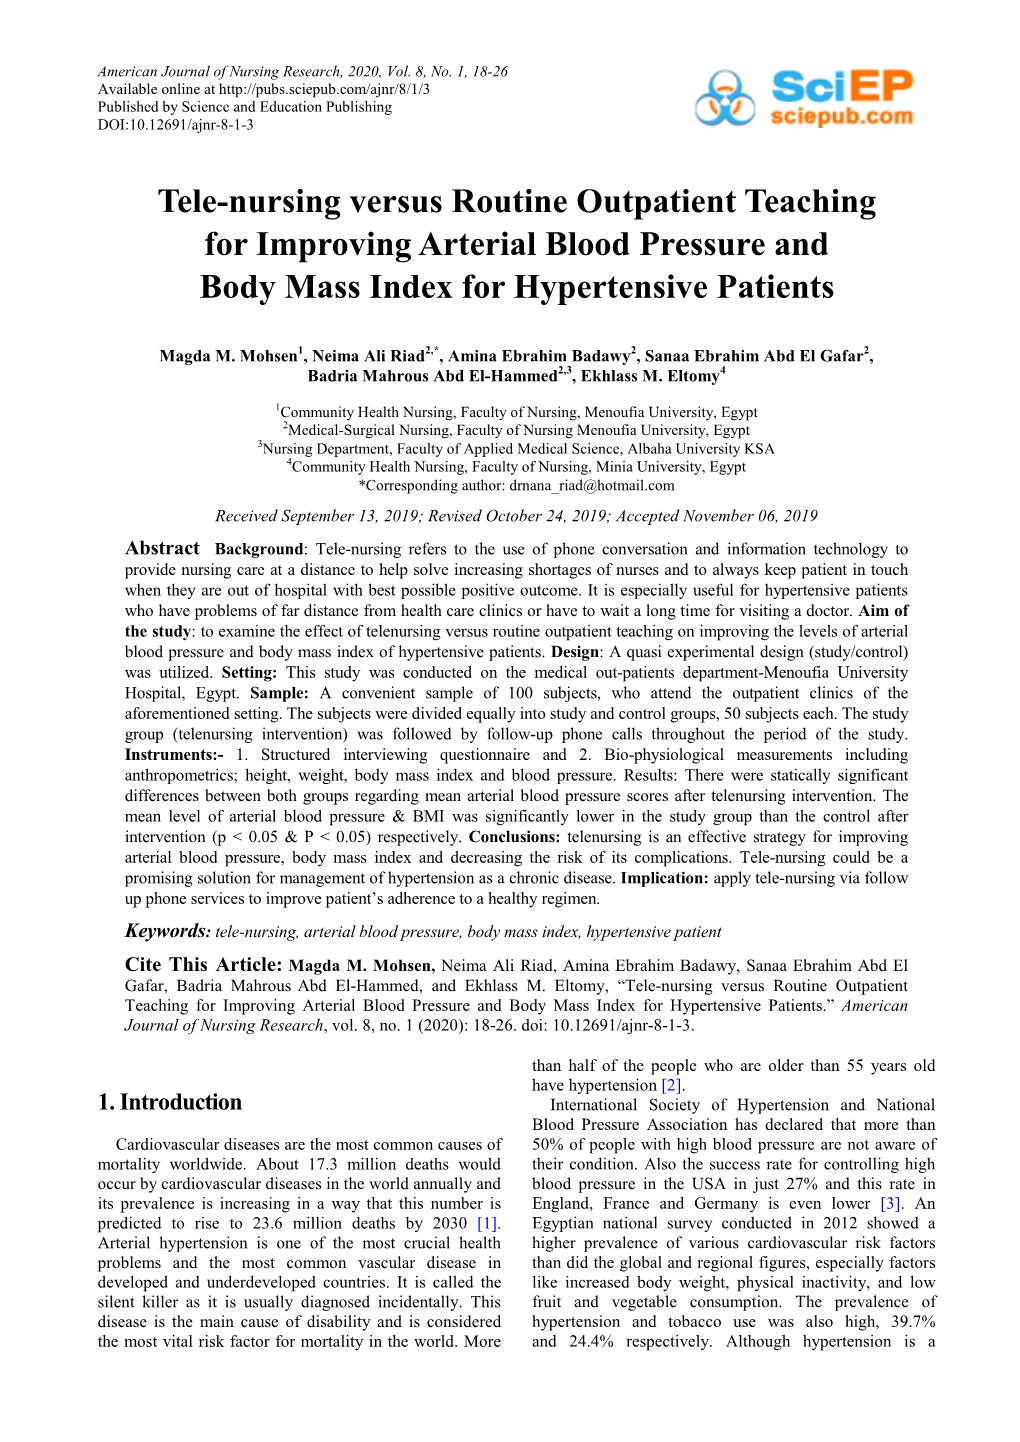 Tele-Nursing Versus Routine Outpatient Teaching for Improving Arterial Blood Pressure and Body Mass Index for Hypertensive Patients